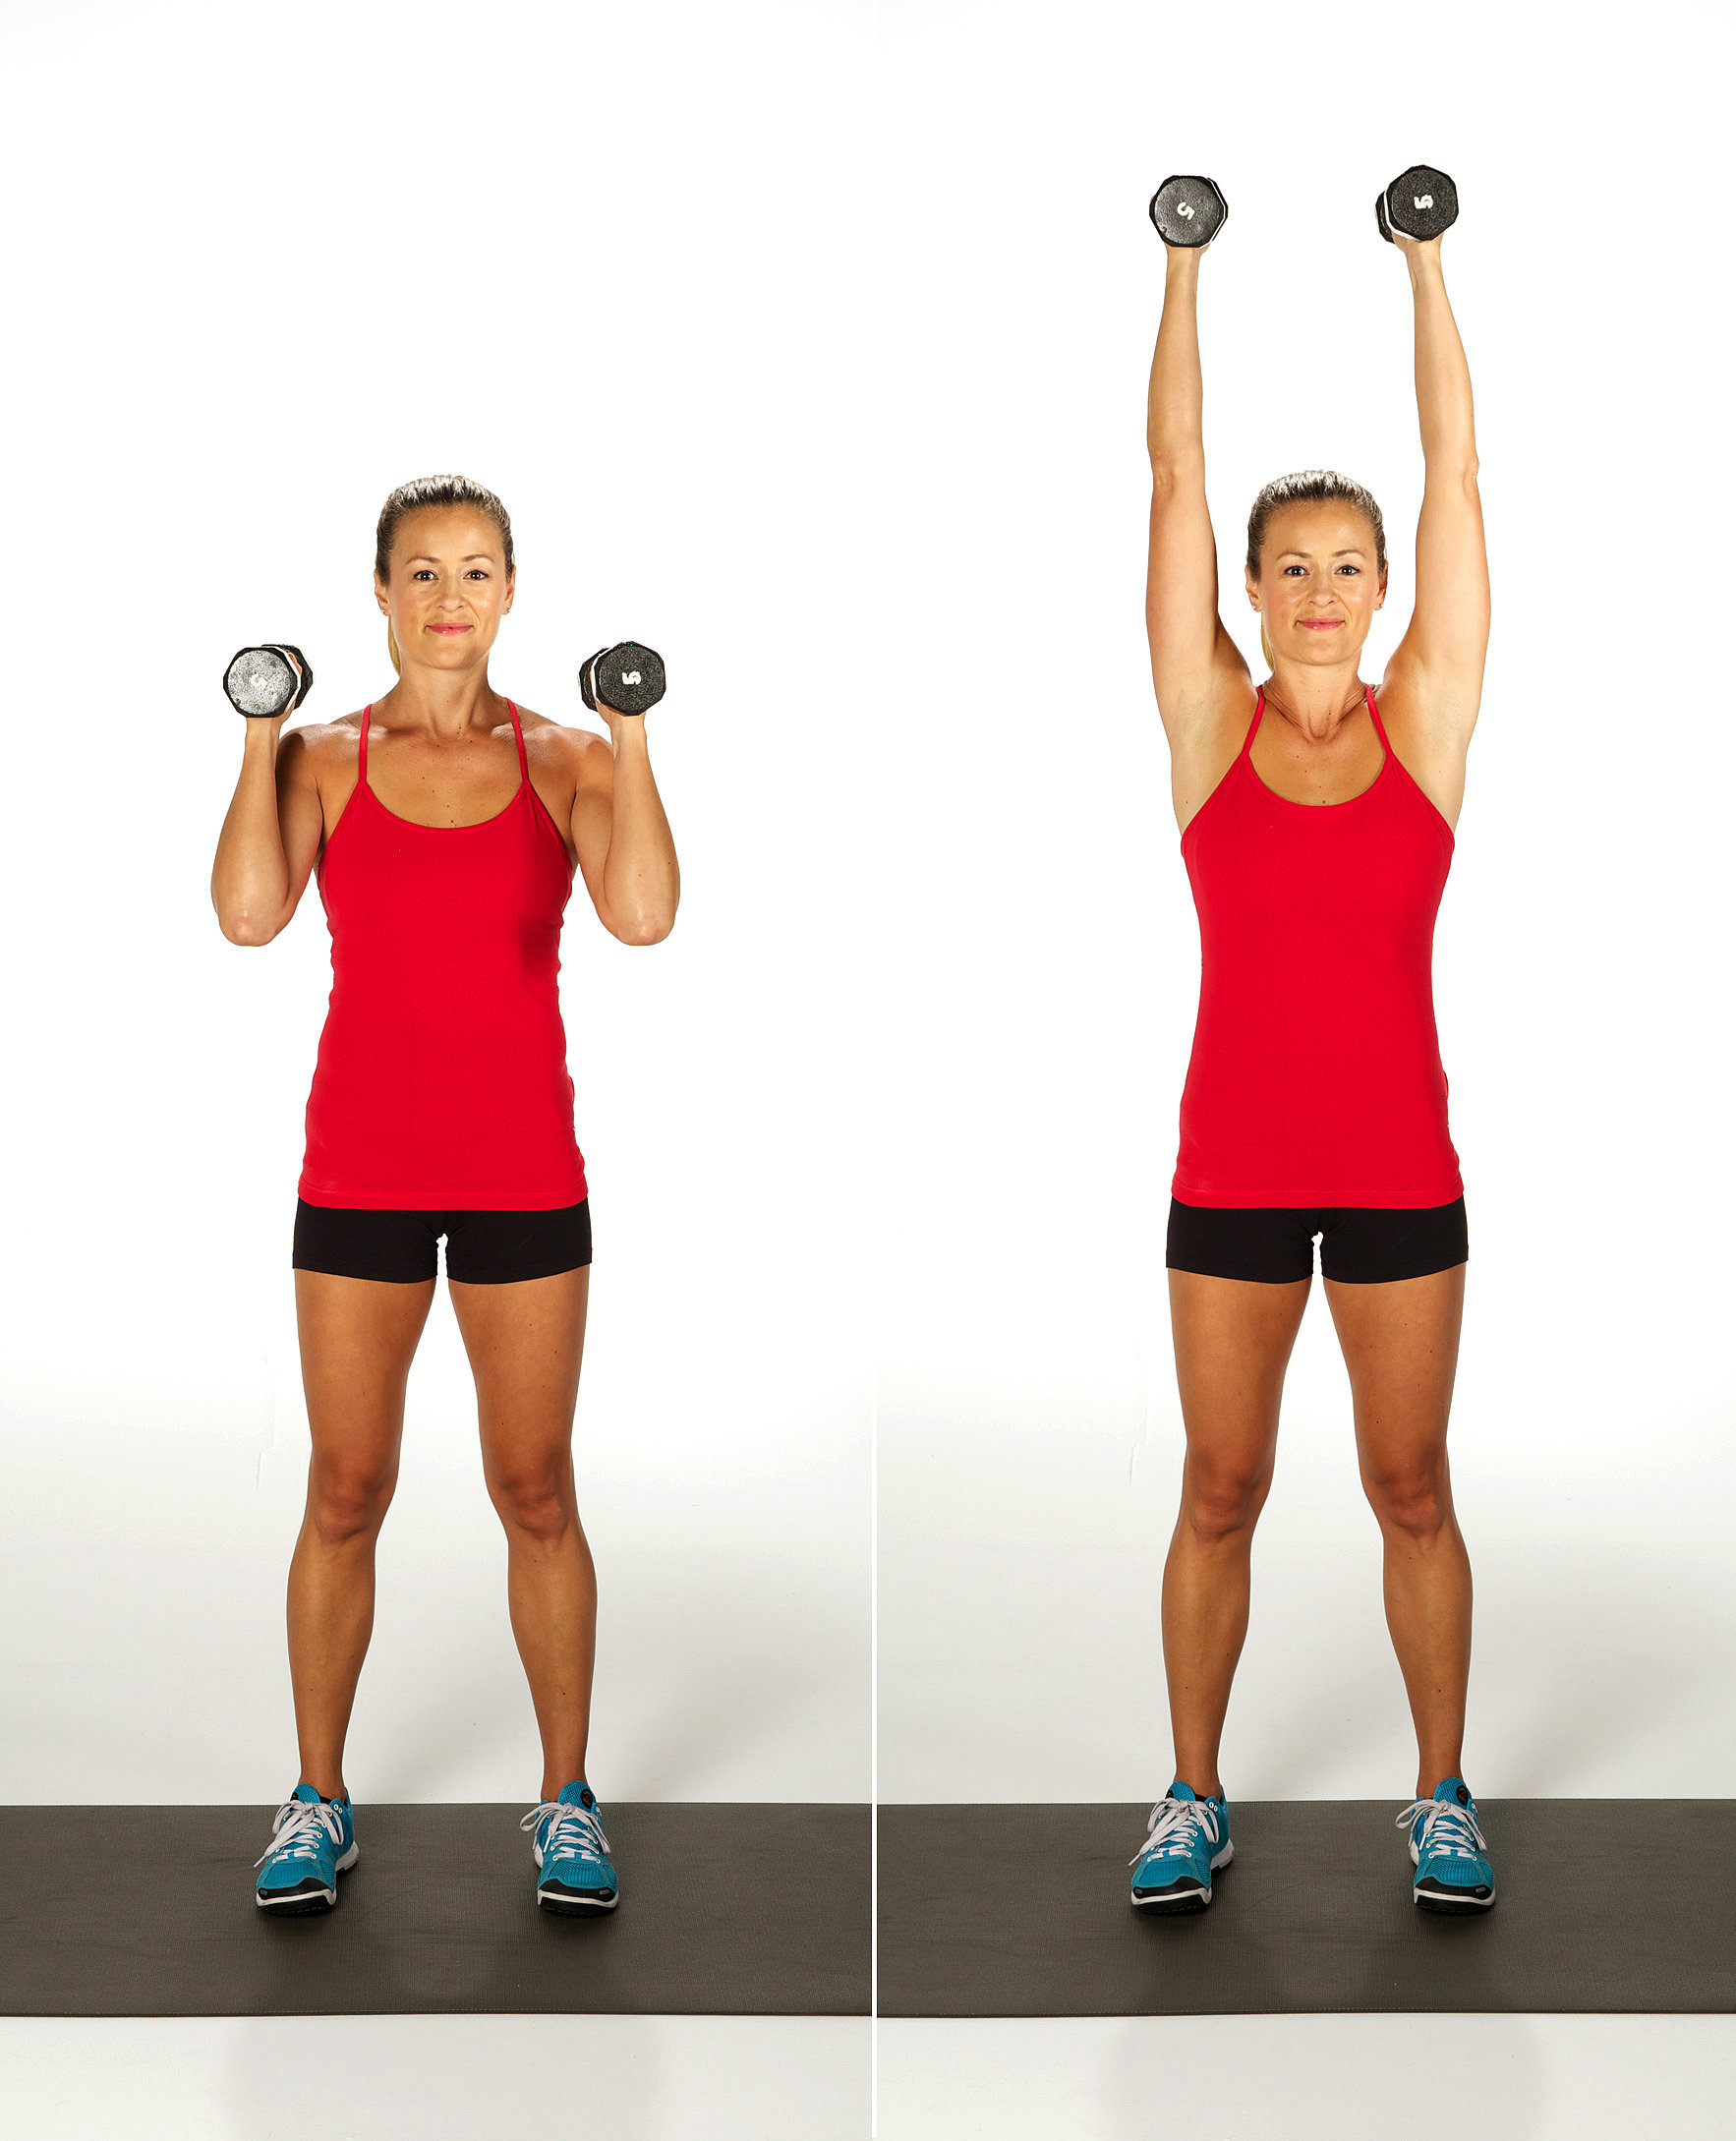 This 3 Step Exercise Will Tone Your Arms Faster! (3)